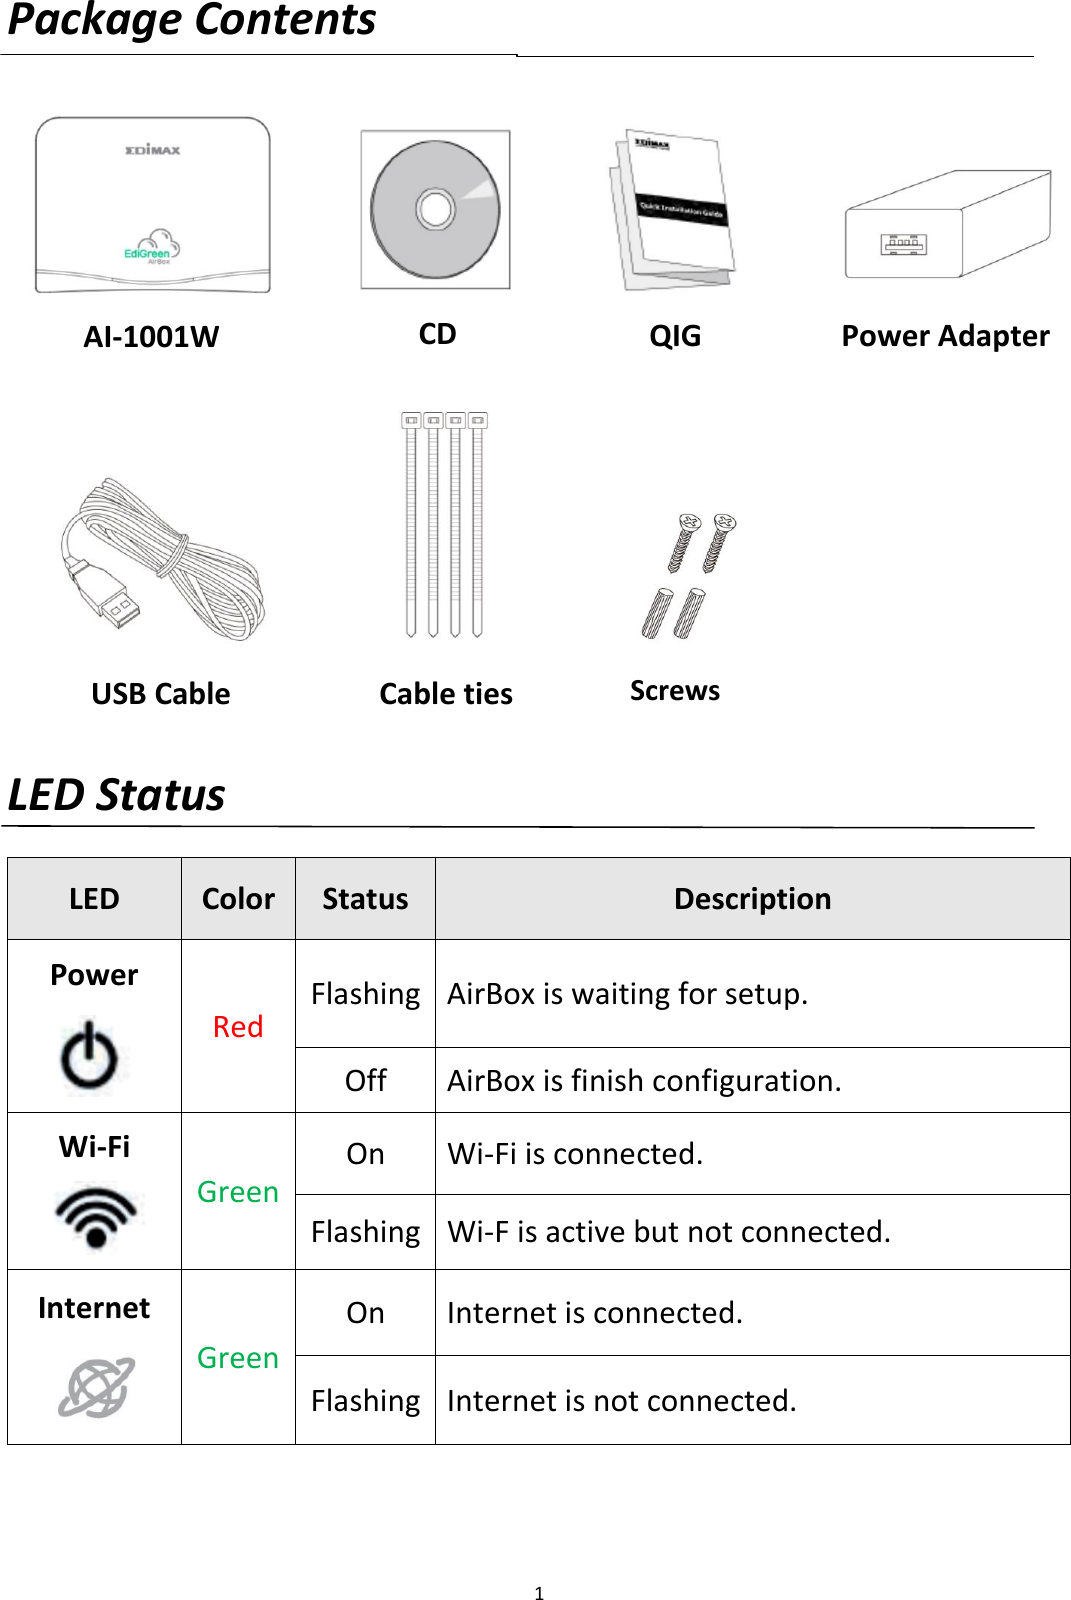 1  Package Contents                    LED Status    LED Color Status Description Power Red Flashing AirBox is waiting for setup. Off AirBox is finish configuration. Wi-Fi Green On Wi-Fi is connected. Flashing Wi-F is active but not connected. Internet Green On Internet is connected. Flashing Internet is not connected.  USB Cable    Cable ties   Screws   Power Adapter    AI-1001W   CD QIG 